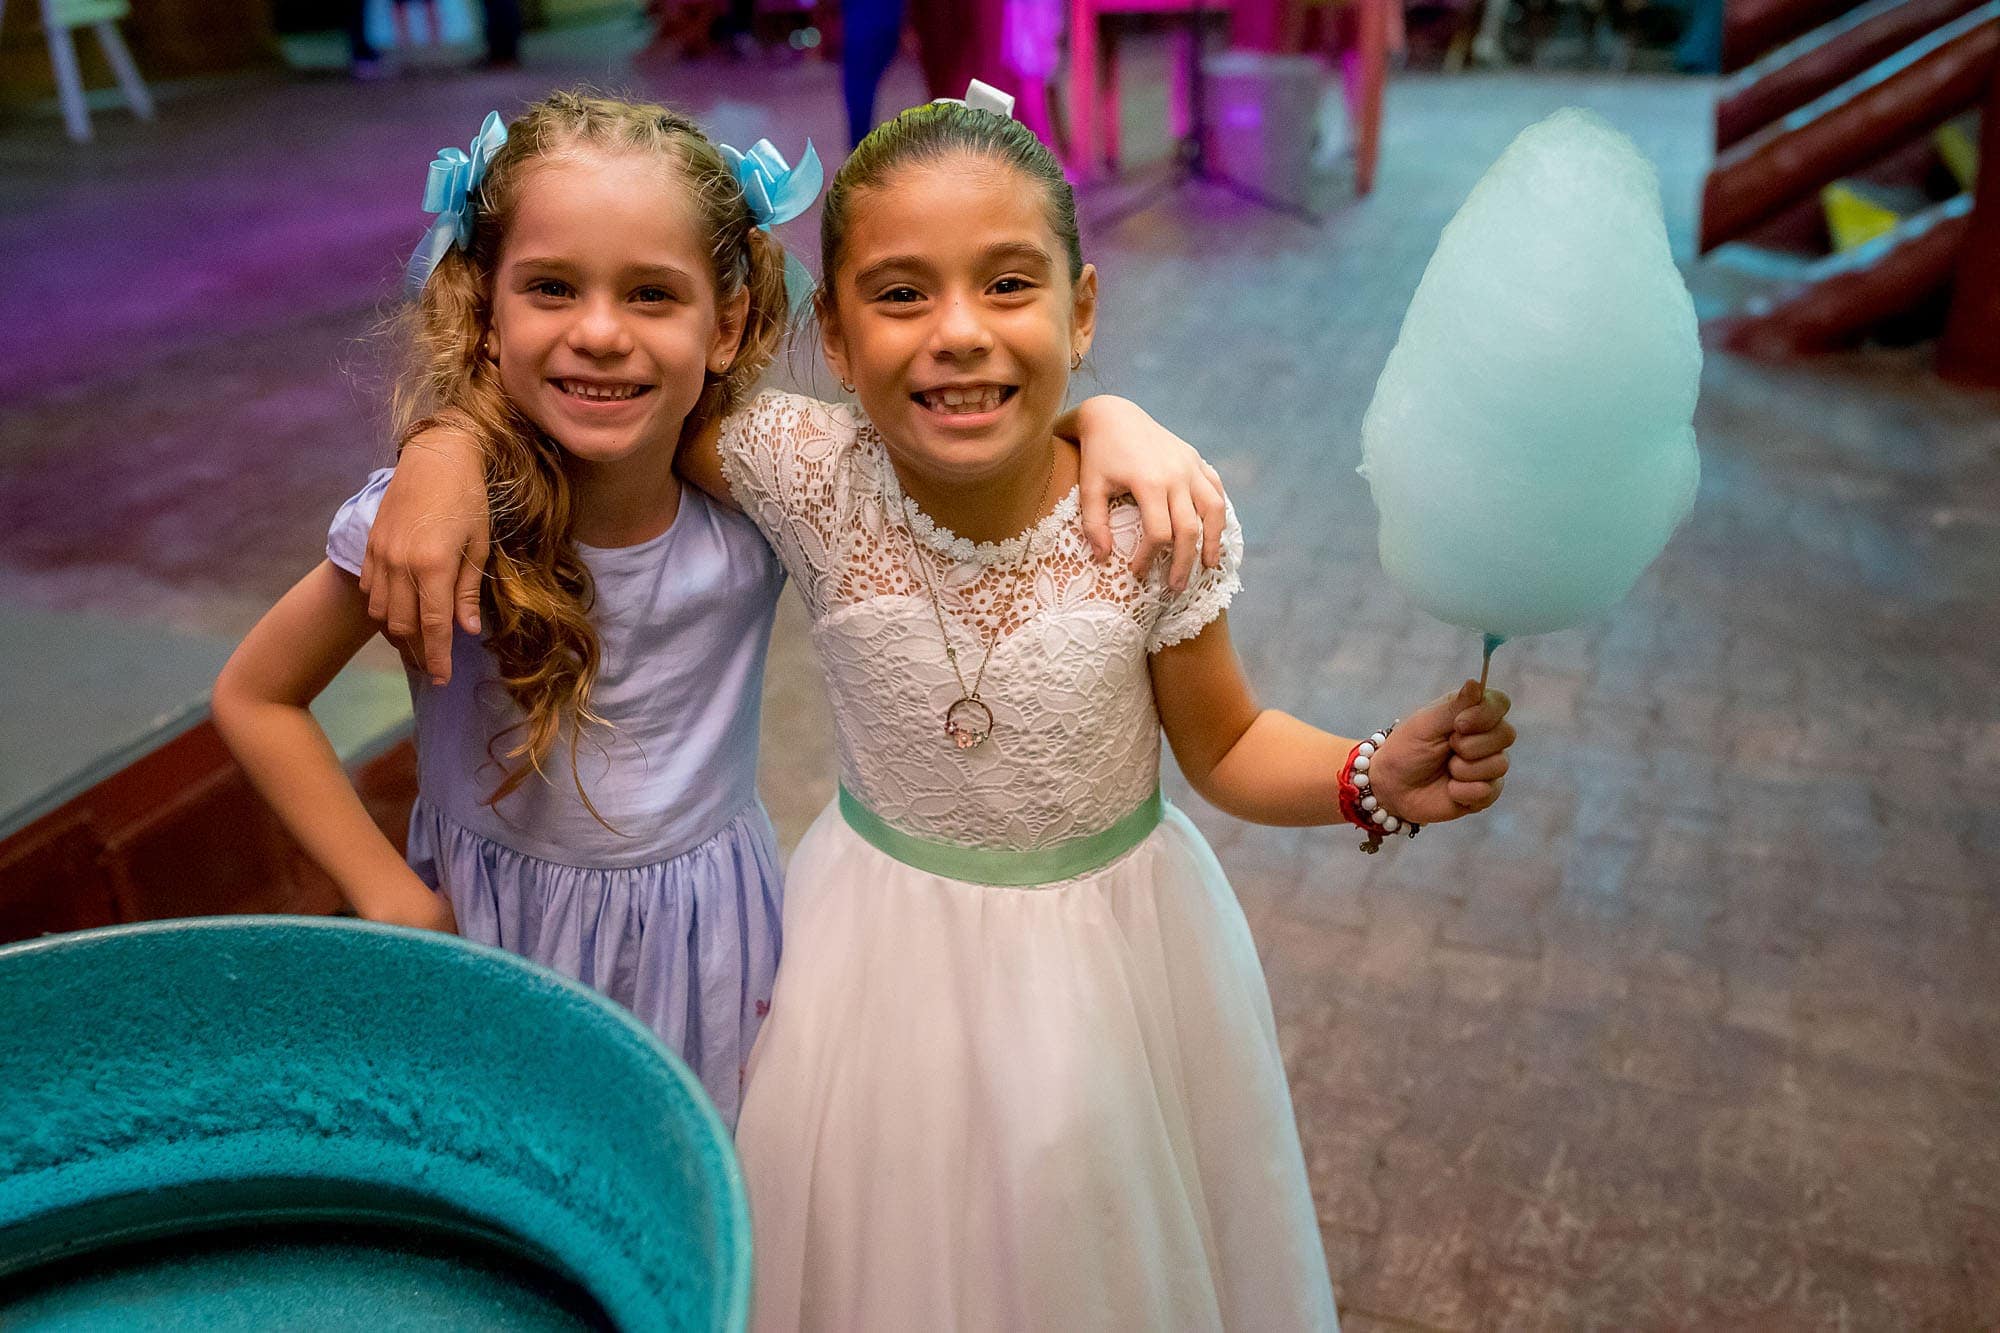 Two little girls enjoying the cotton candy stand